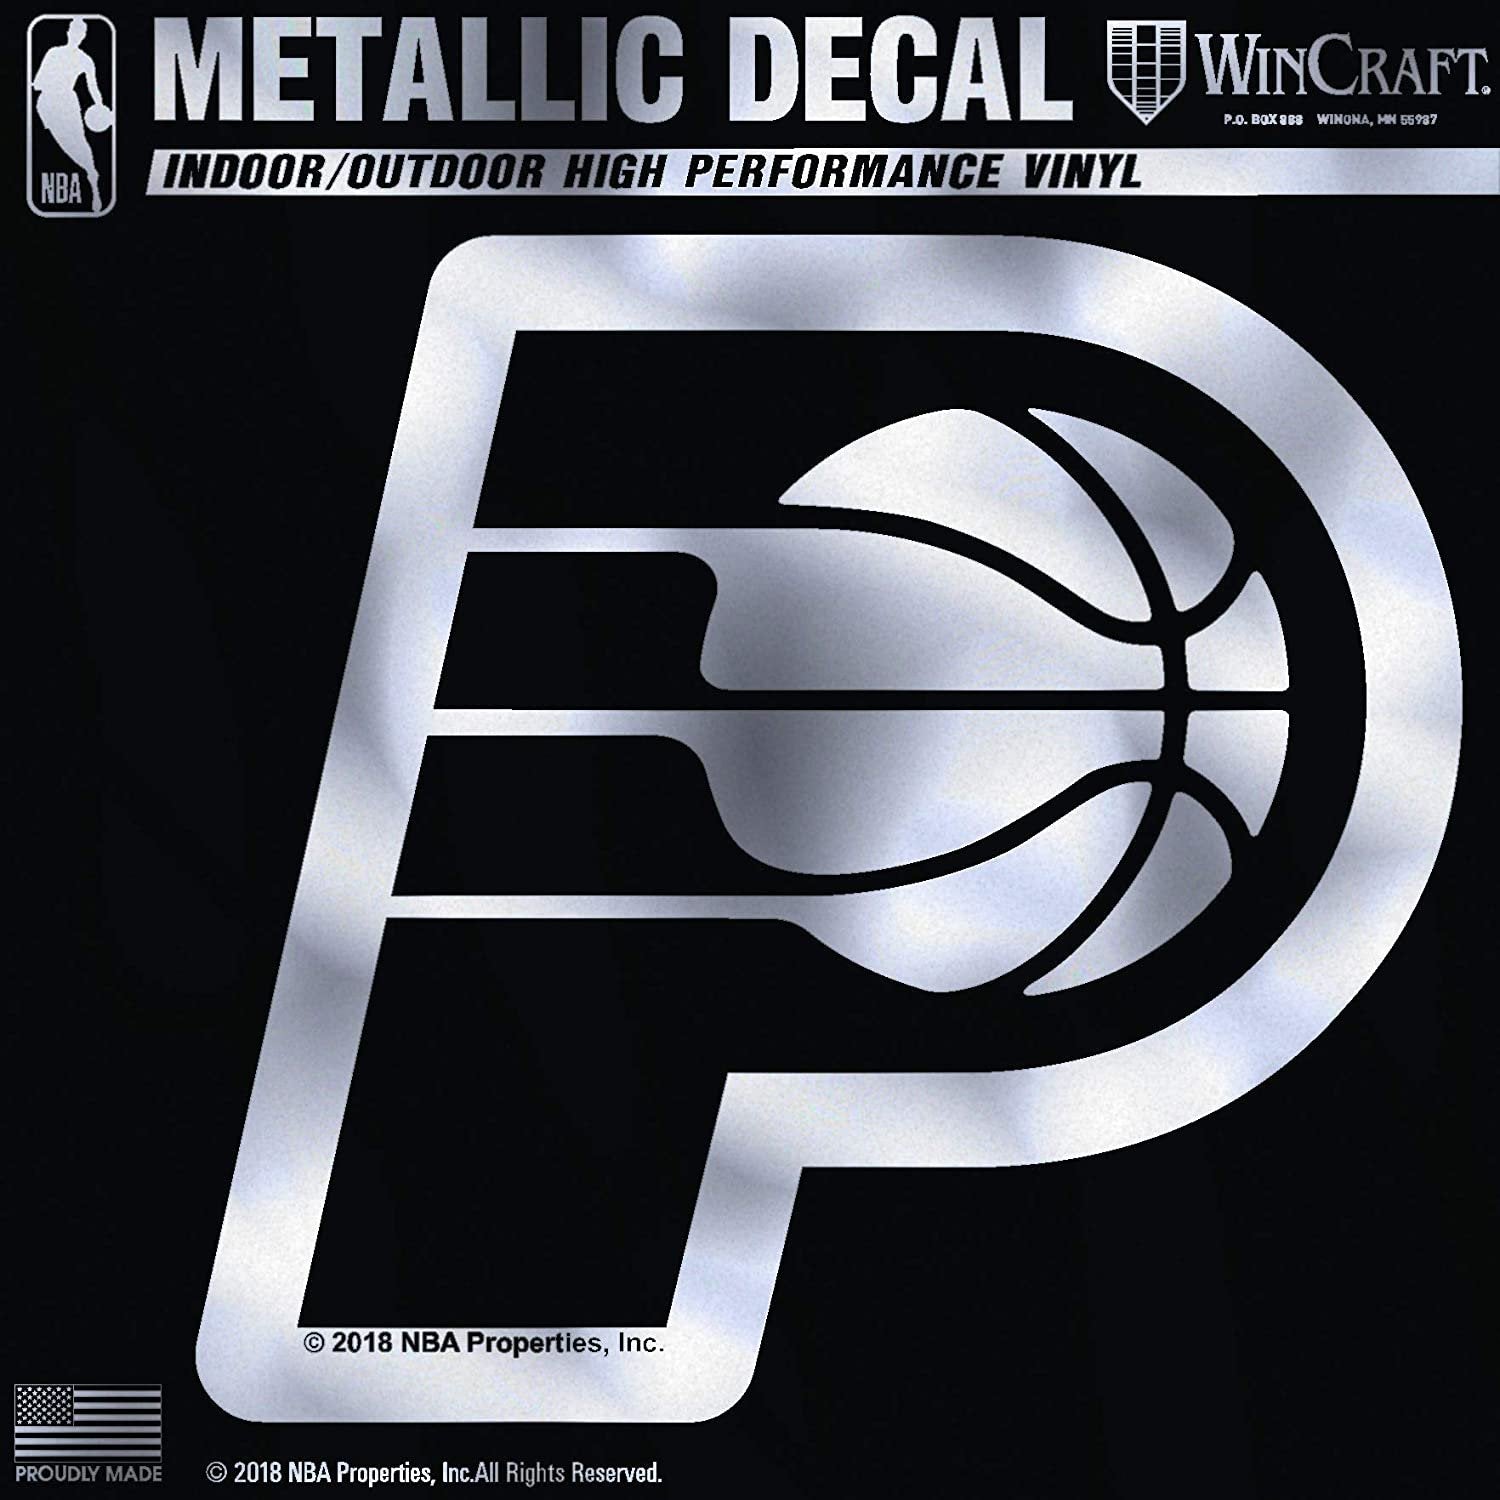 Indiana Pacers 6 Inch Decal Sticker, Metallic Chrome Shimmer Design, Vinyl Die Cut, Auto Home